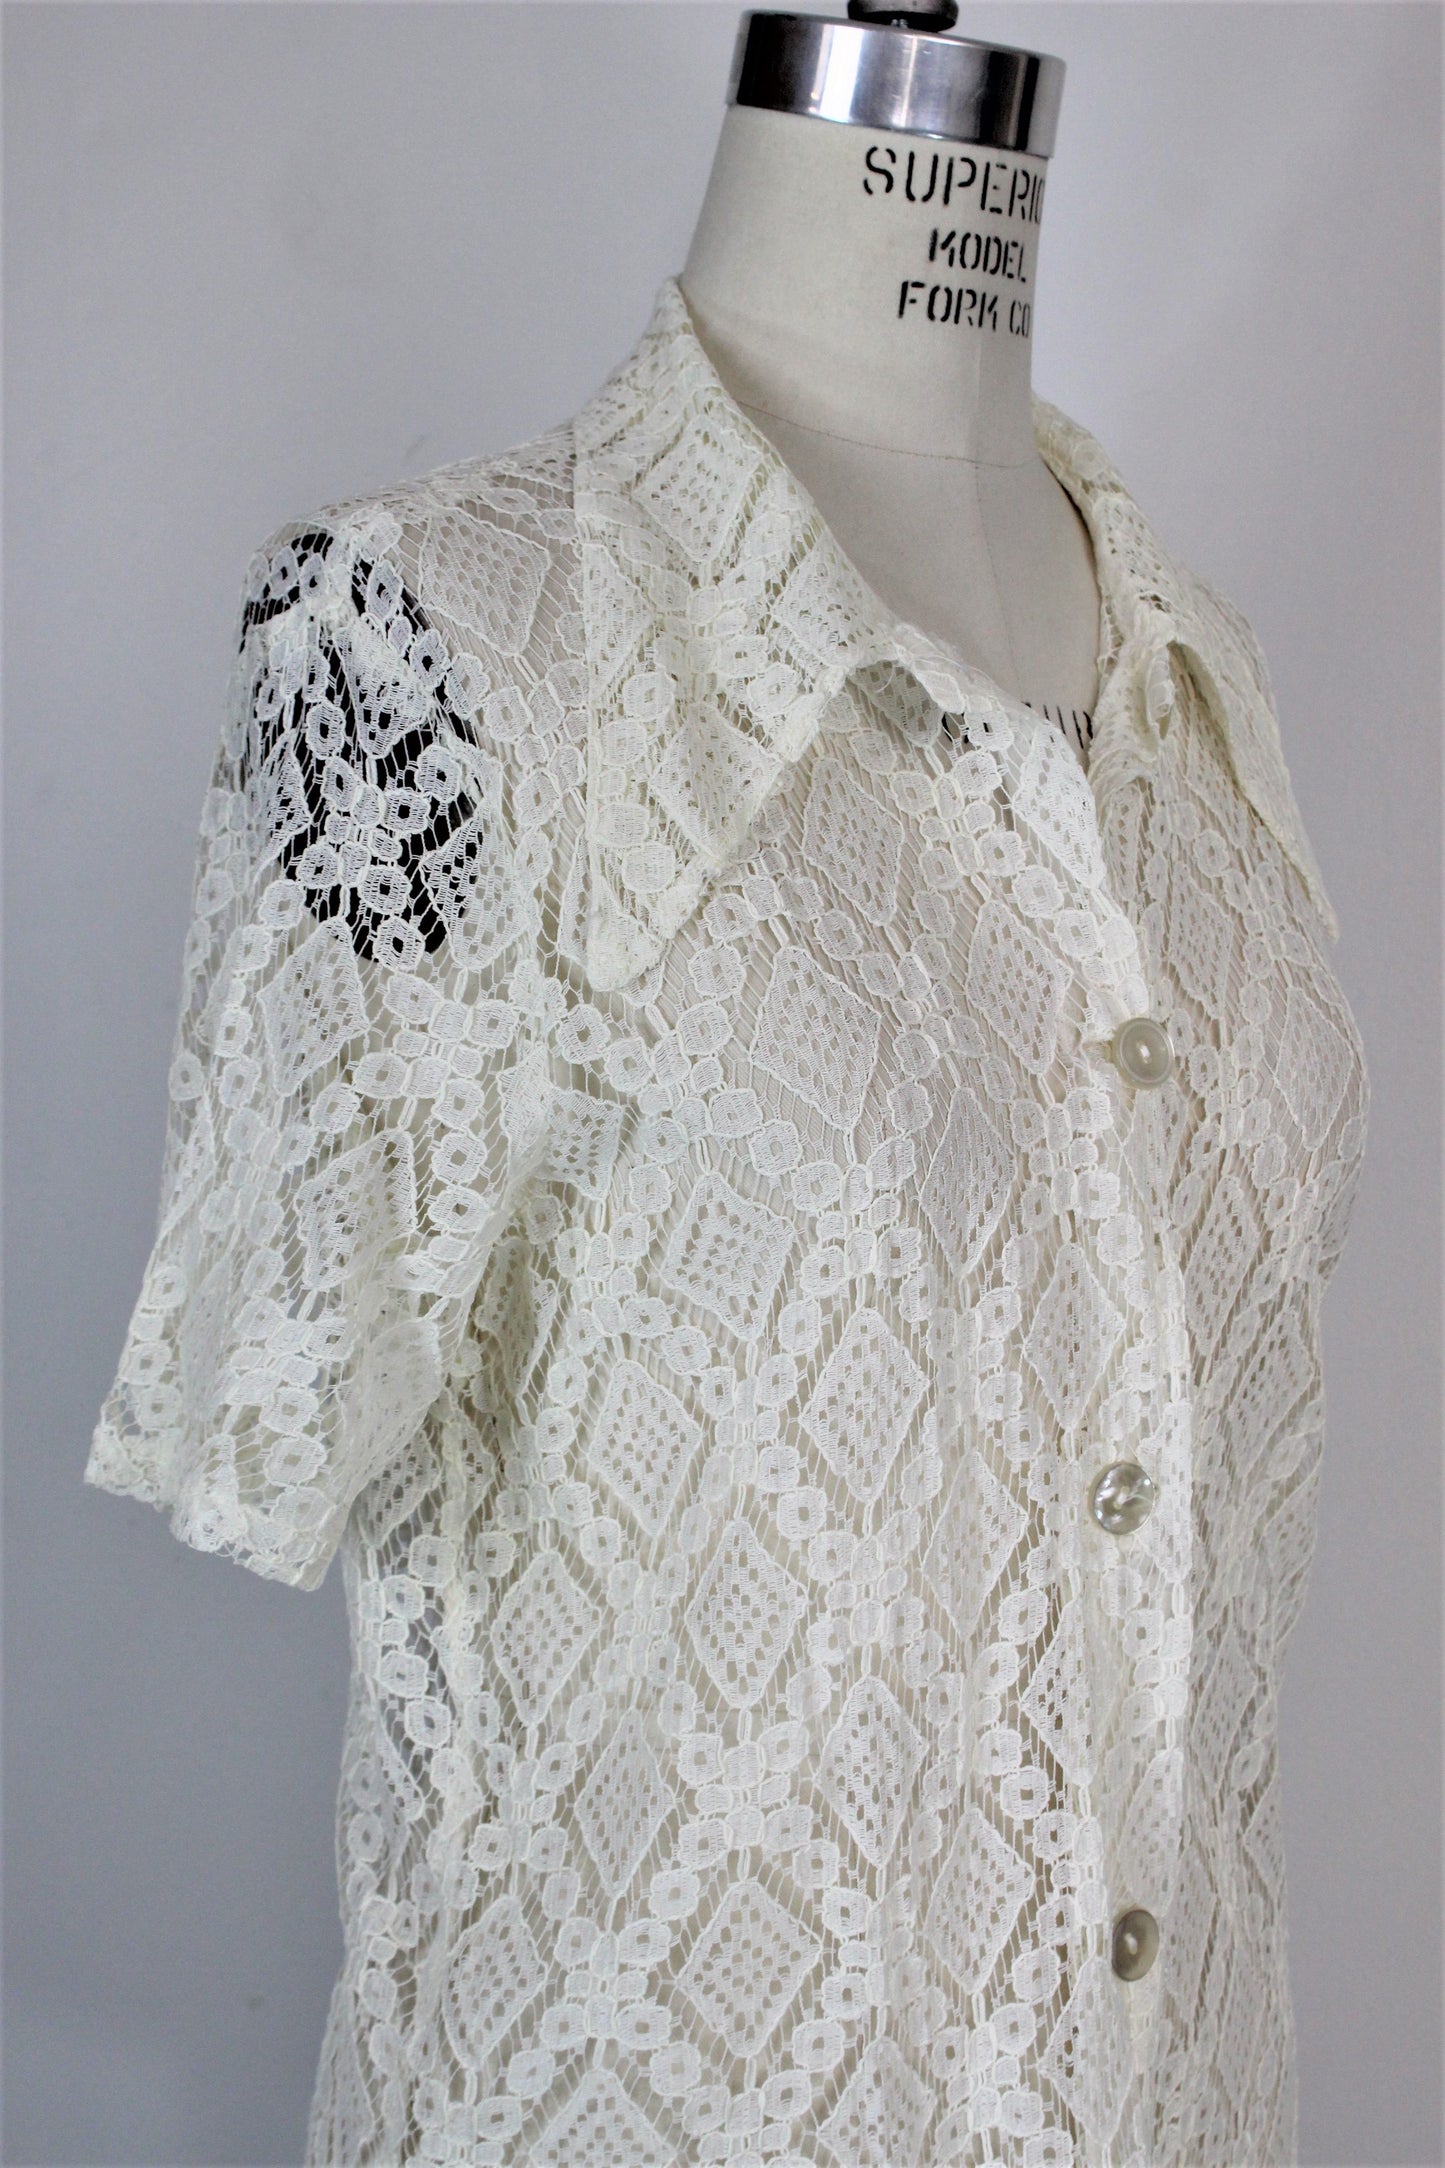 Vintage 1970s White Lace Blouse With Short Sleeves